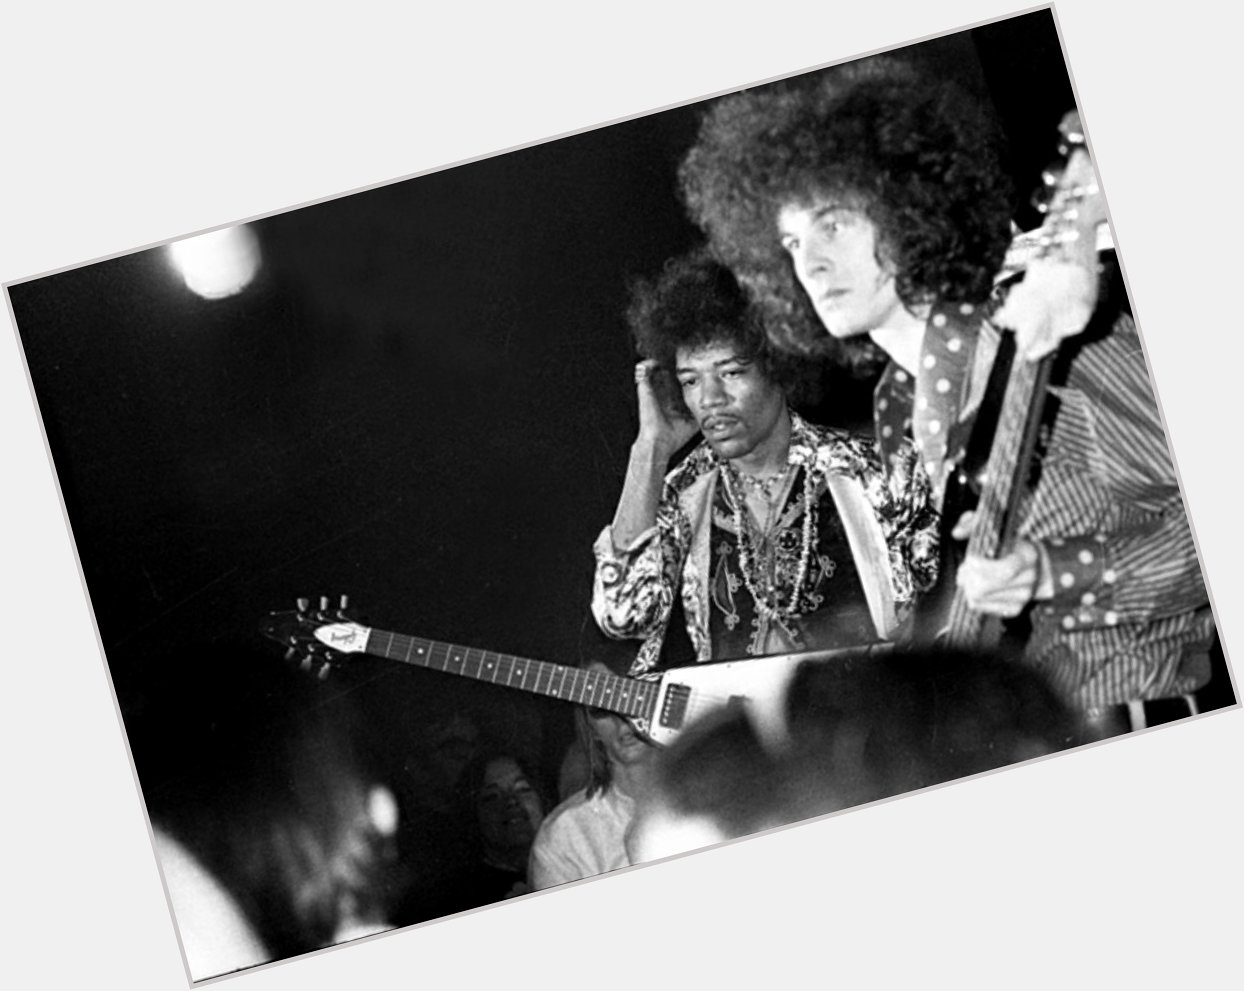 Happy 70th birthday Noel Redding, bassist with The Jimi Hendrix Experience. Redding died on 11th May 2003 aged 57. 